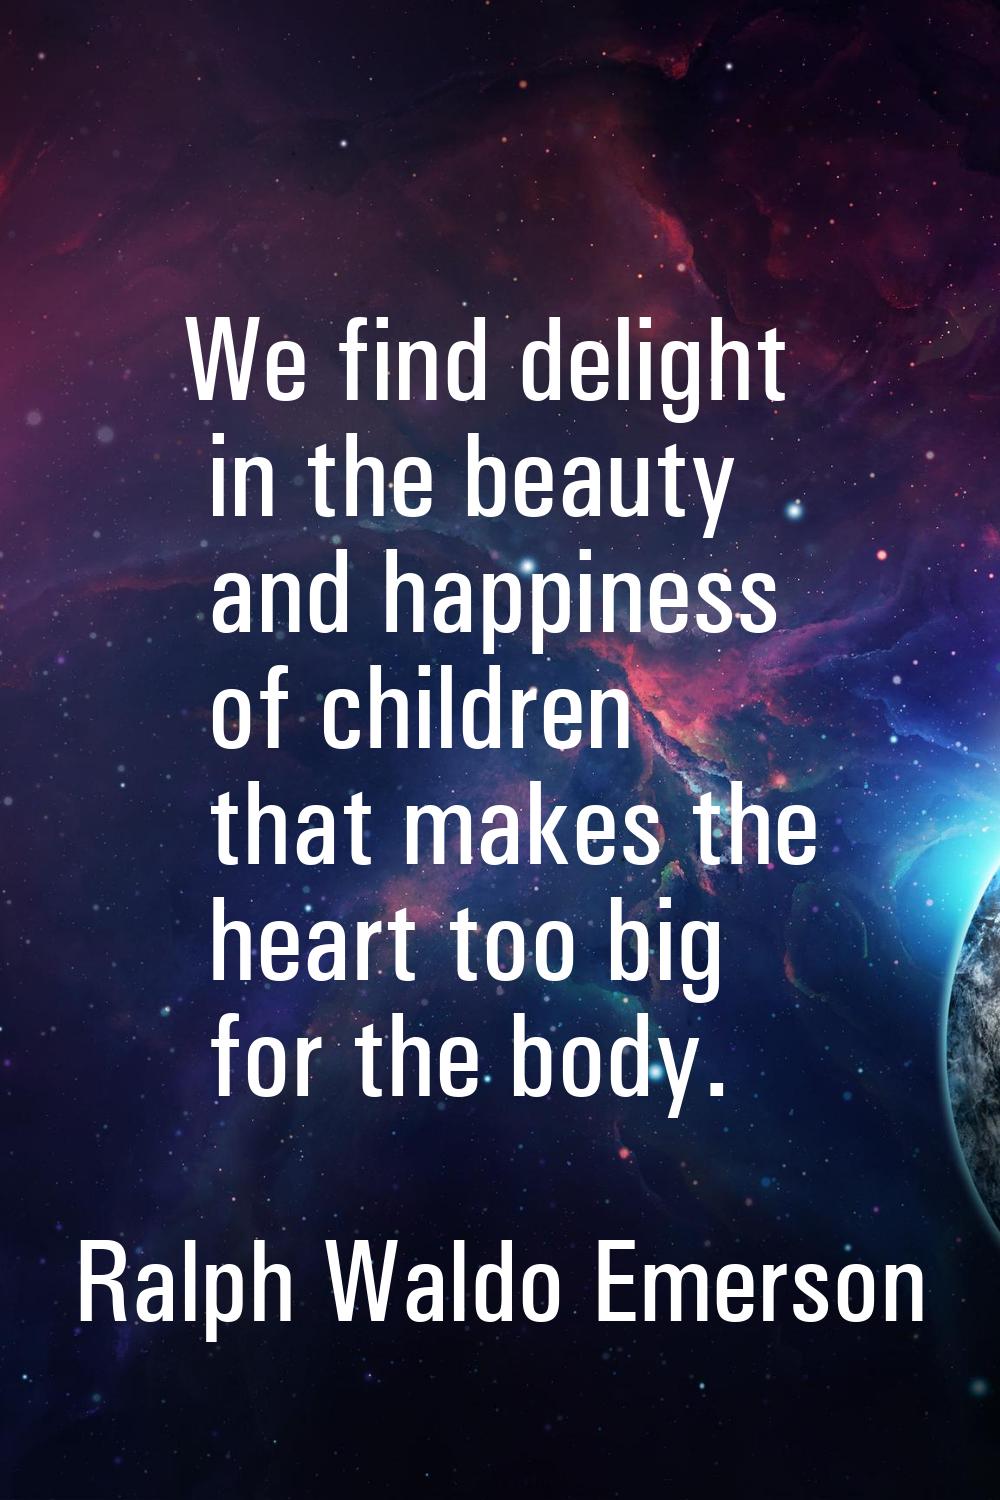 We find delight in the beauty and happiness of children that makes the heart too big for the body.